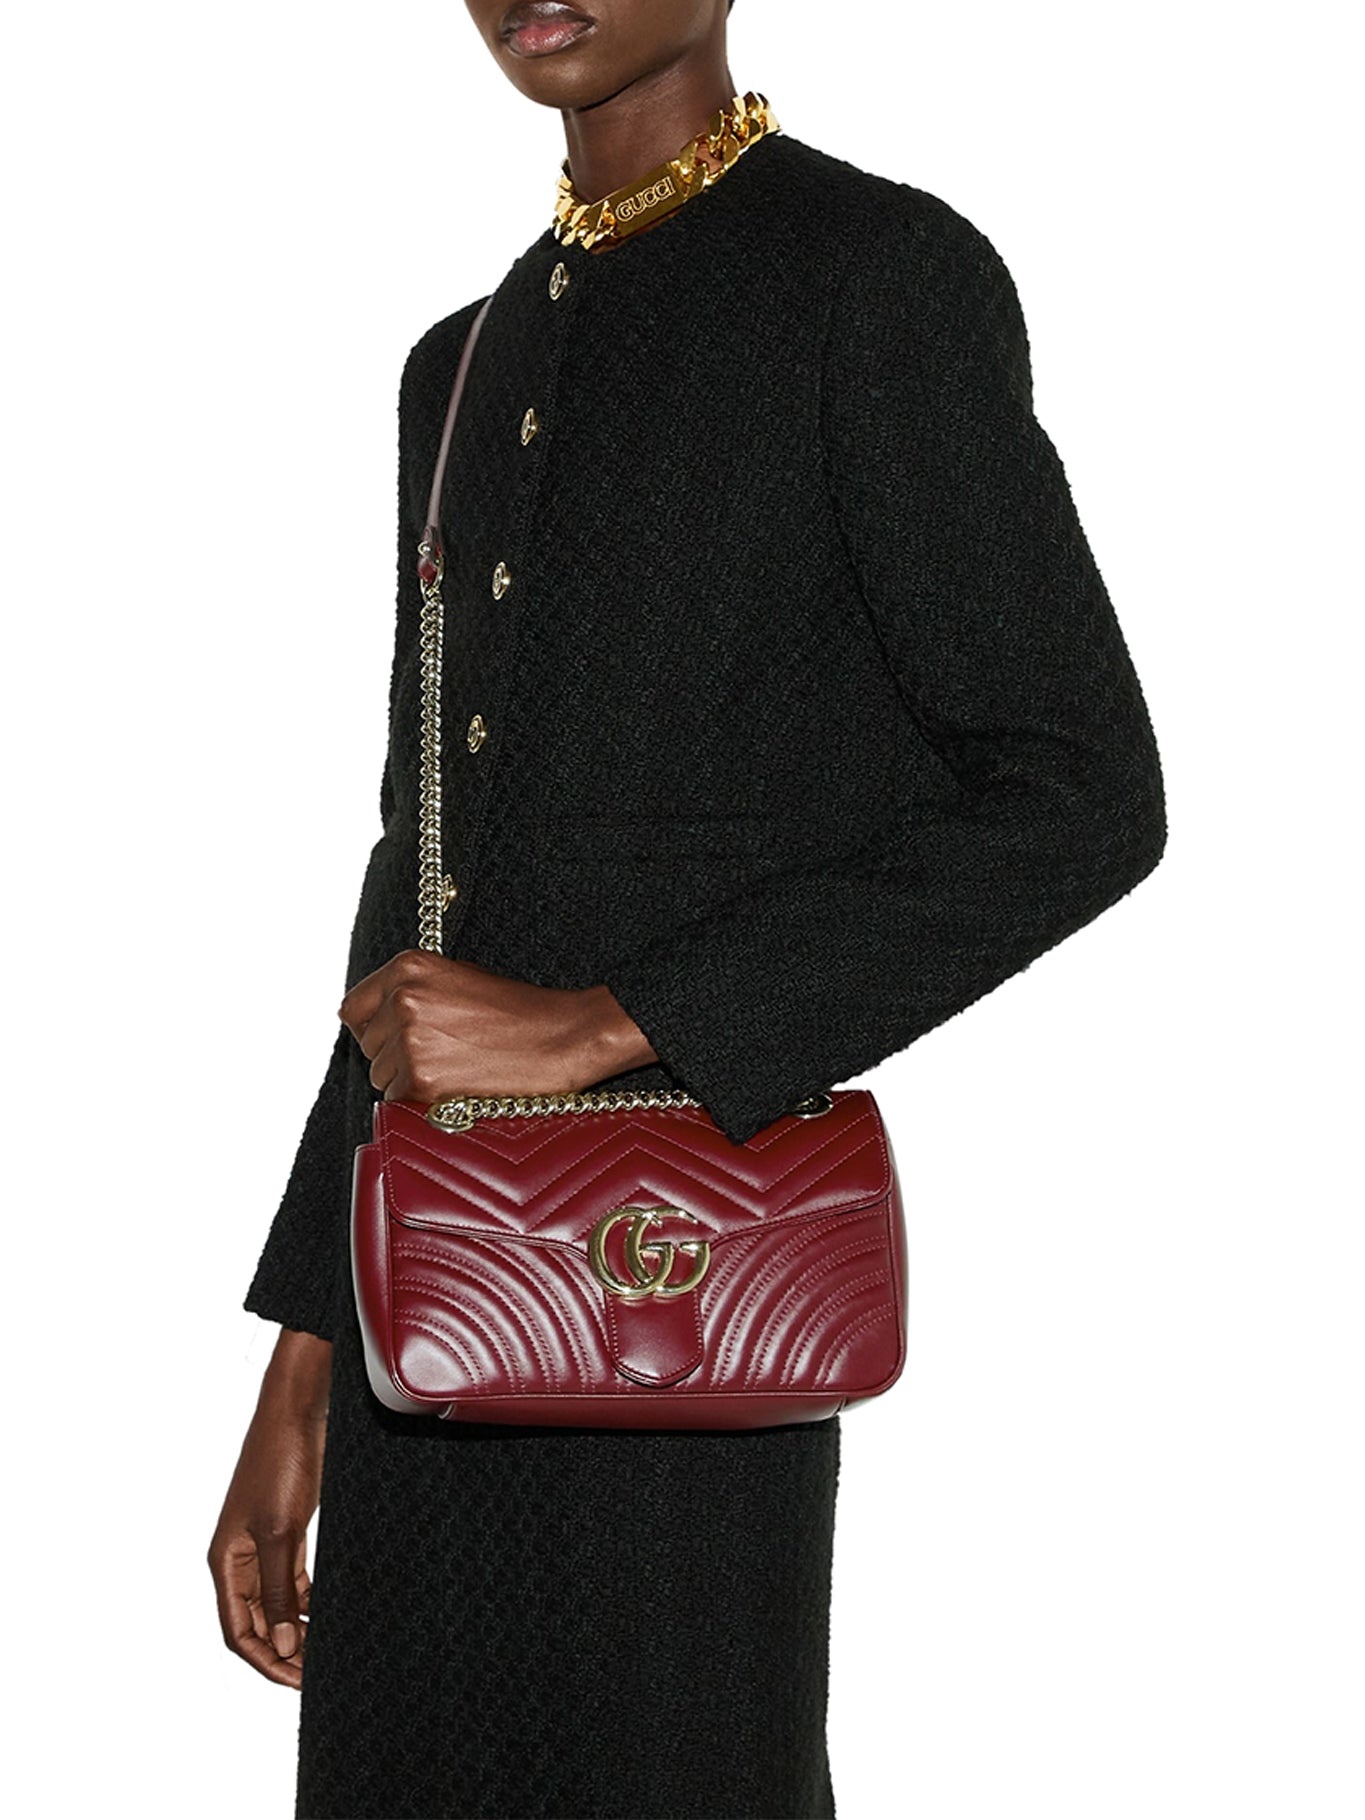 GG MARMONT SMALL SHOULDER BAG - 3